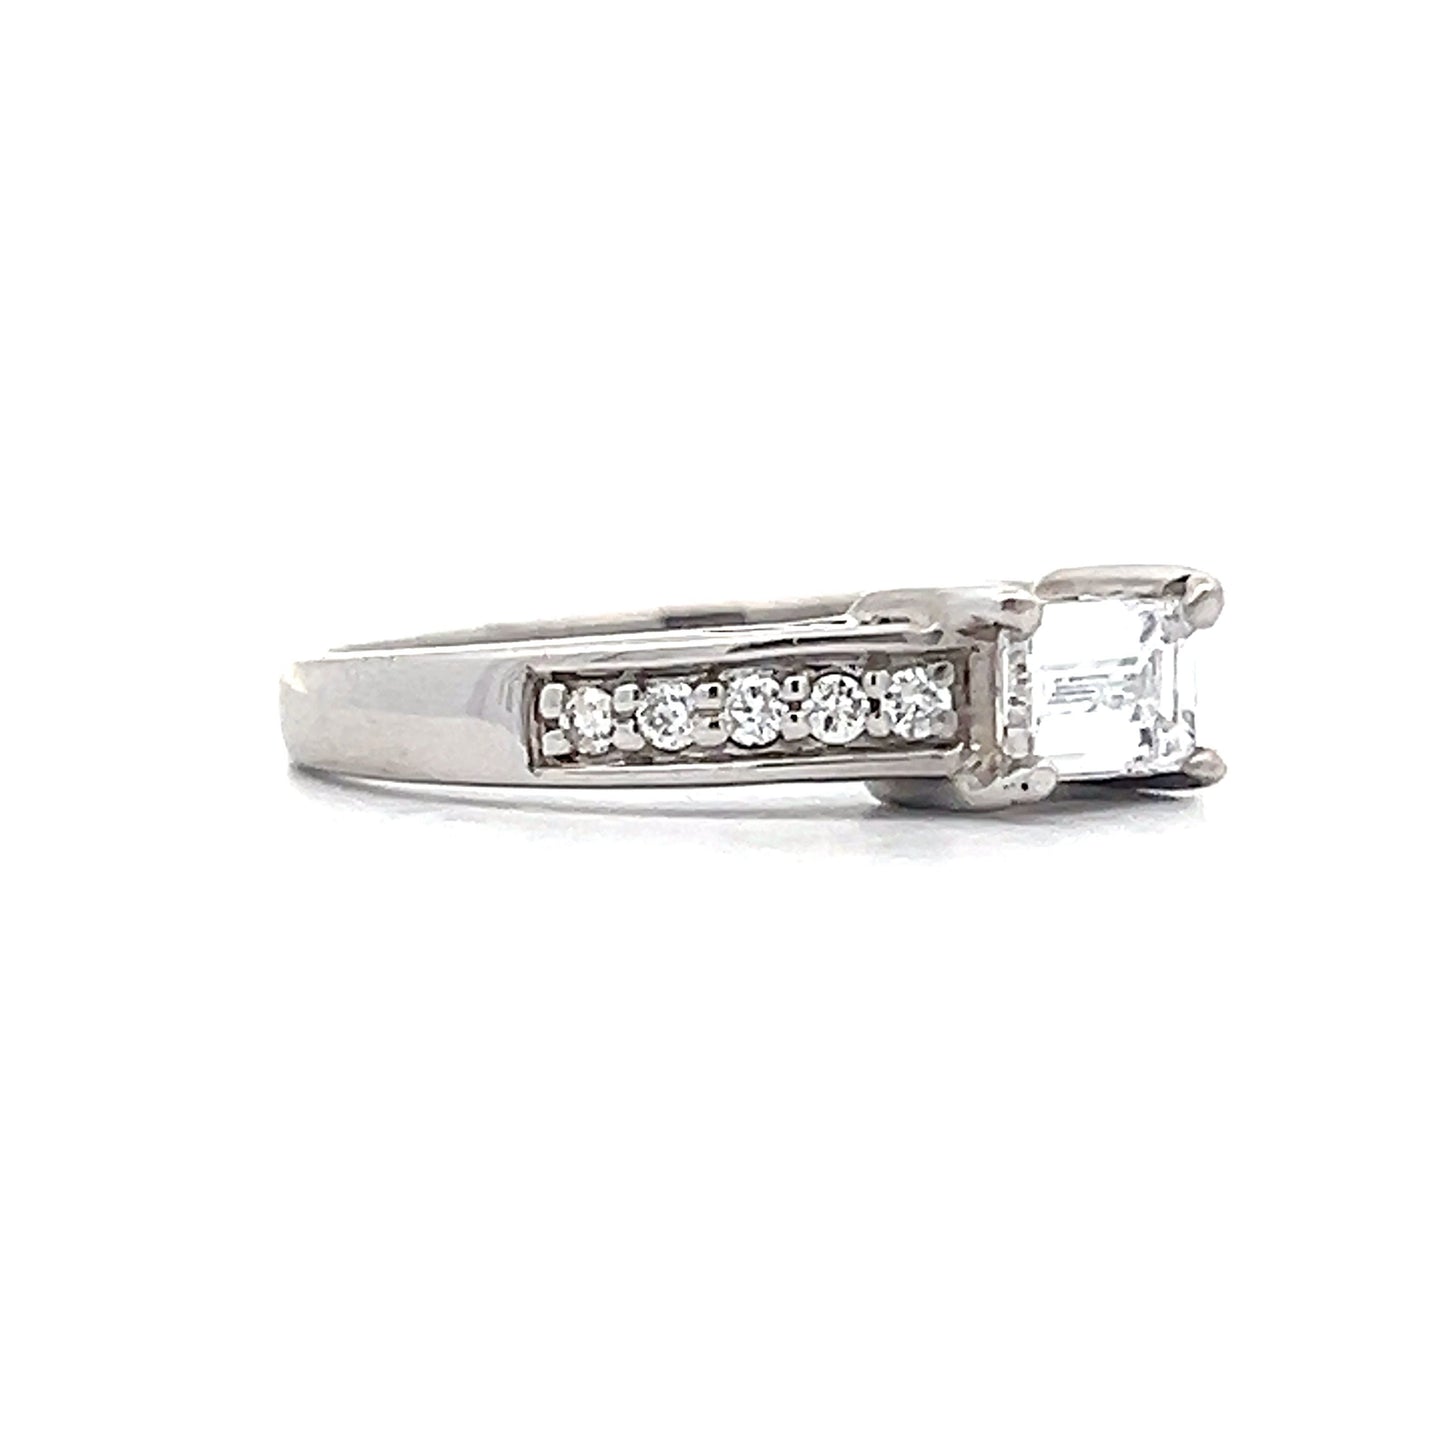 .46 Emerald Cut Diamond Engagement Ring in White Gold